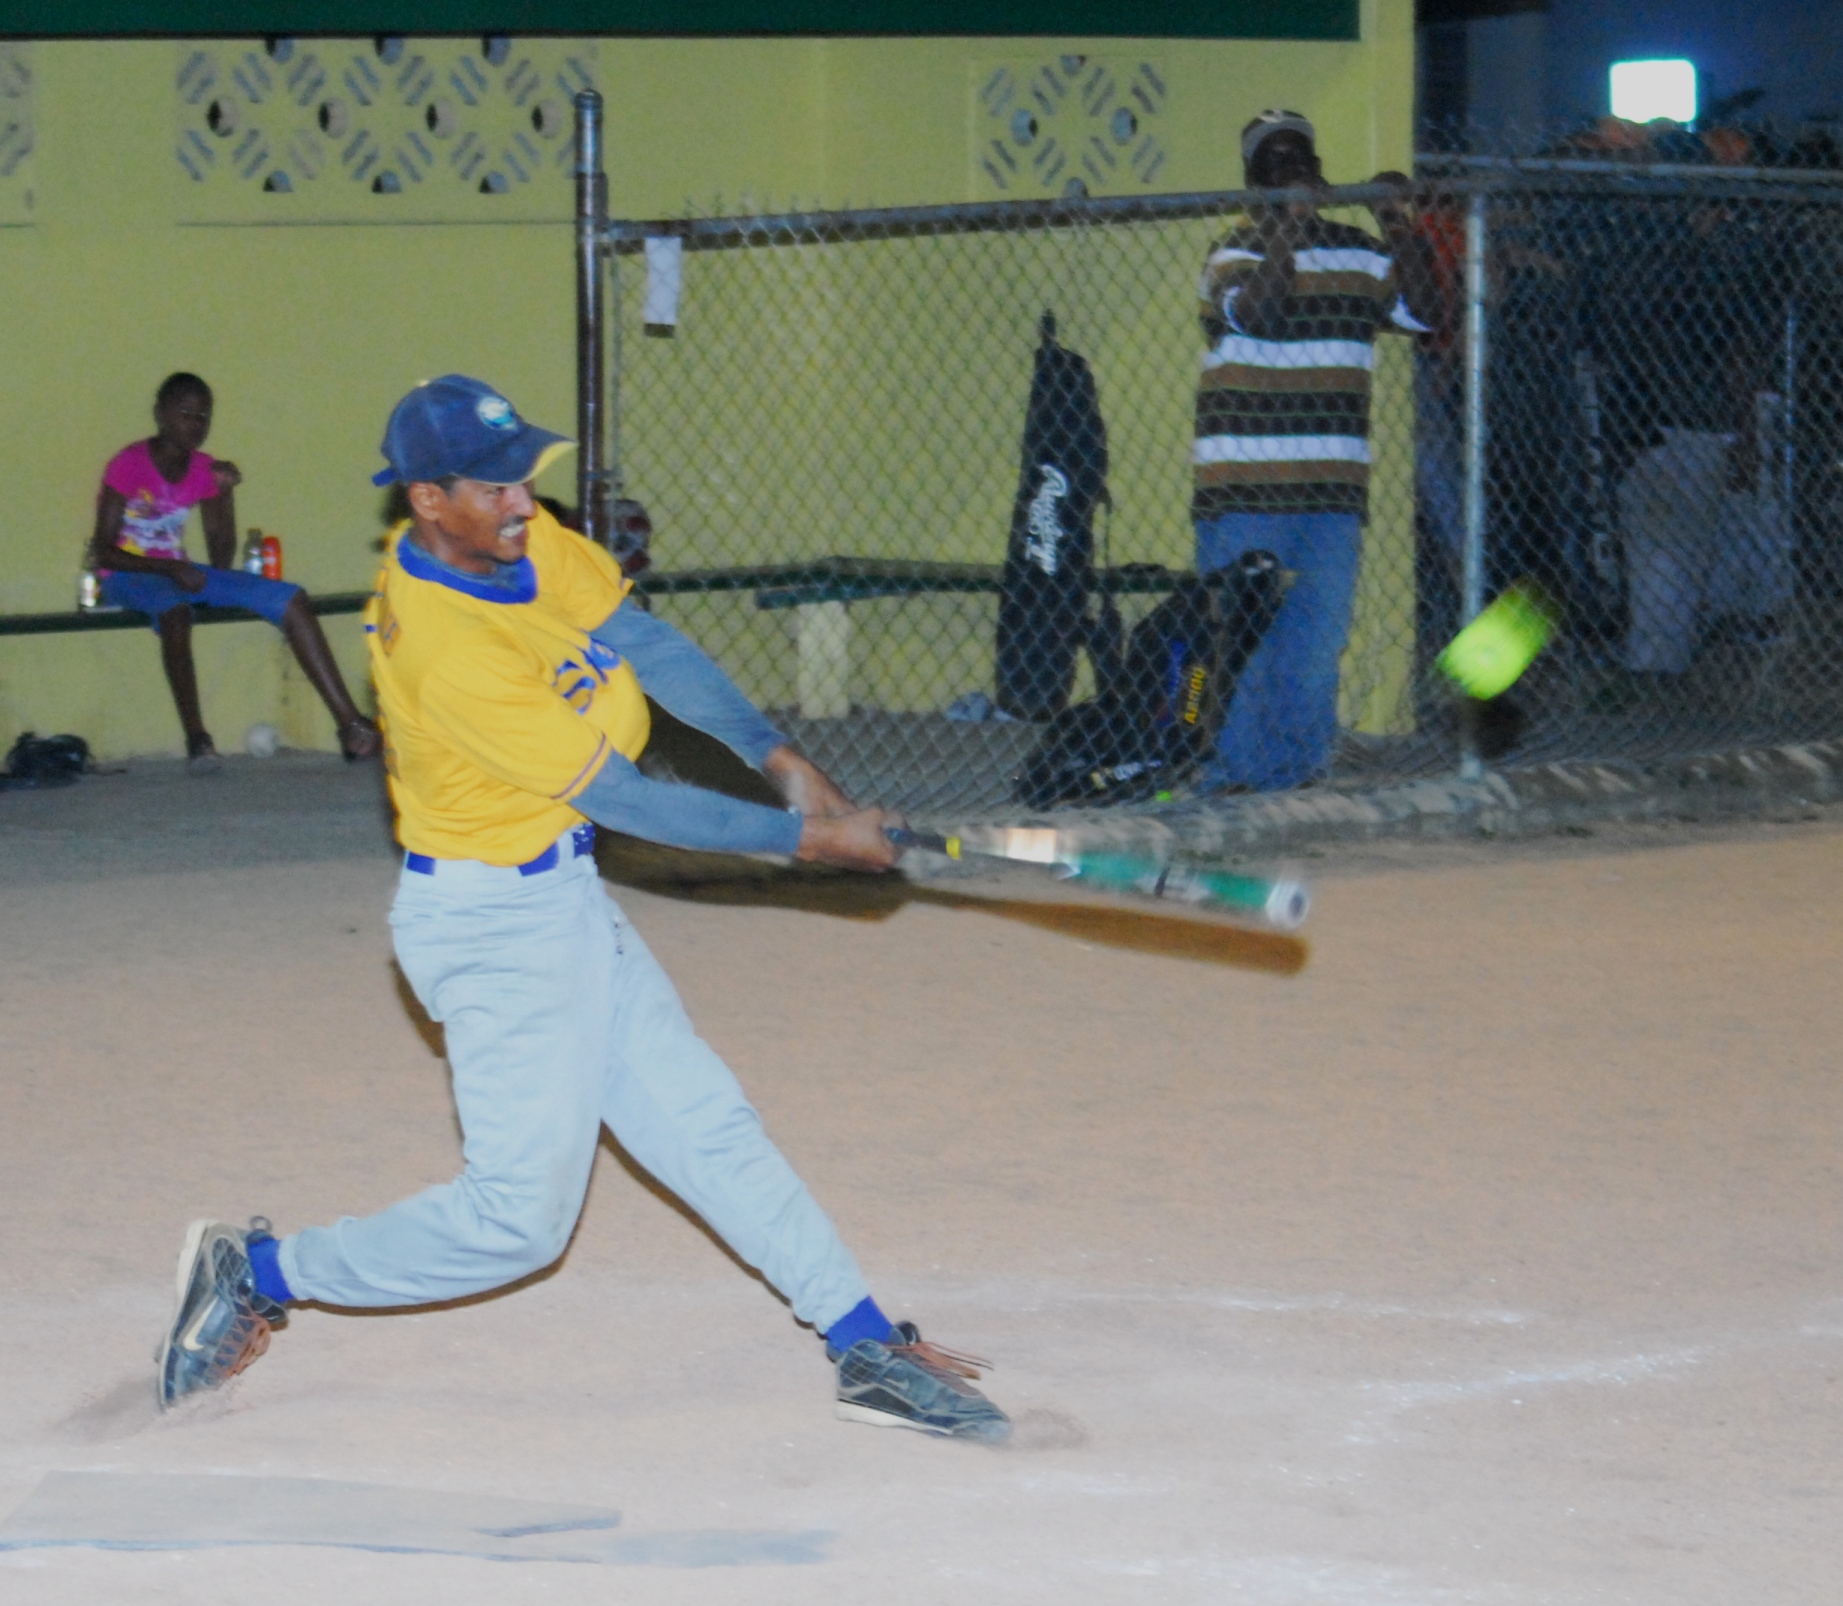 The Stealers’ Enrique Soto blasts off in game one.